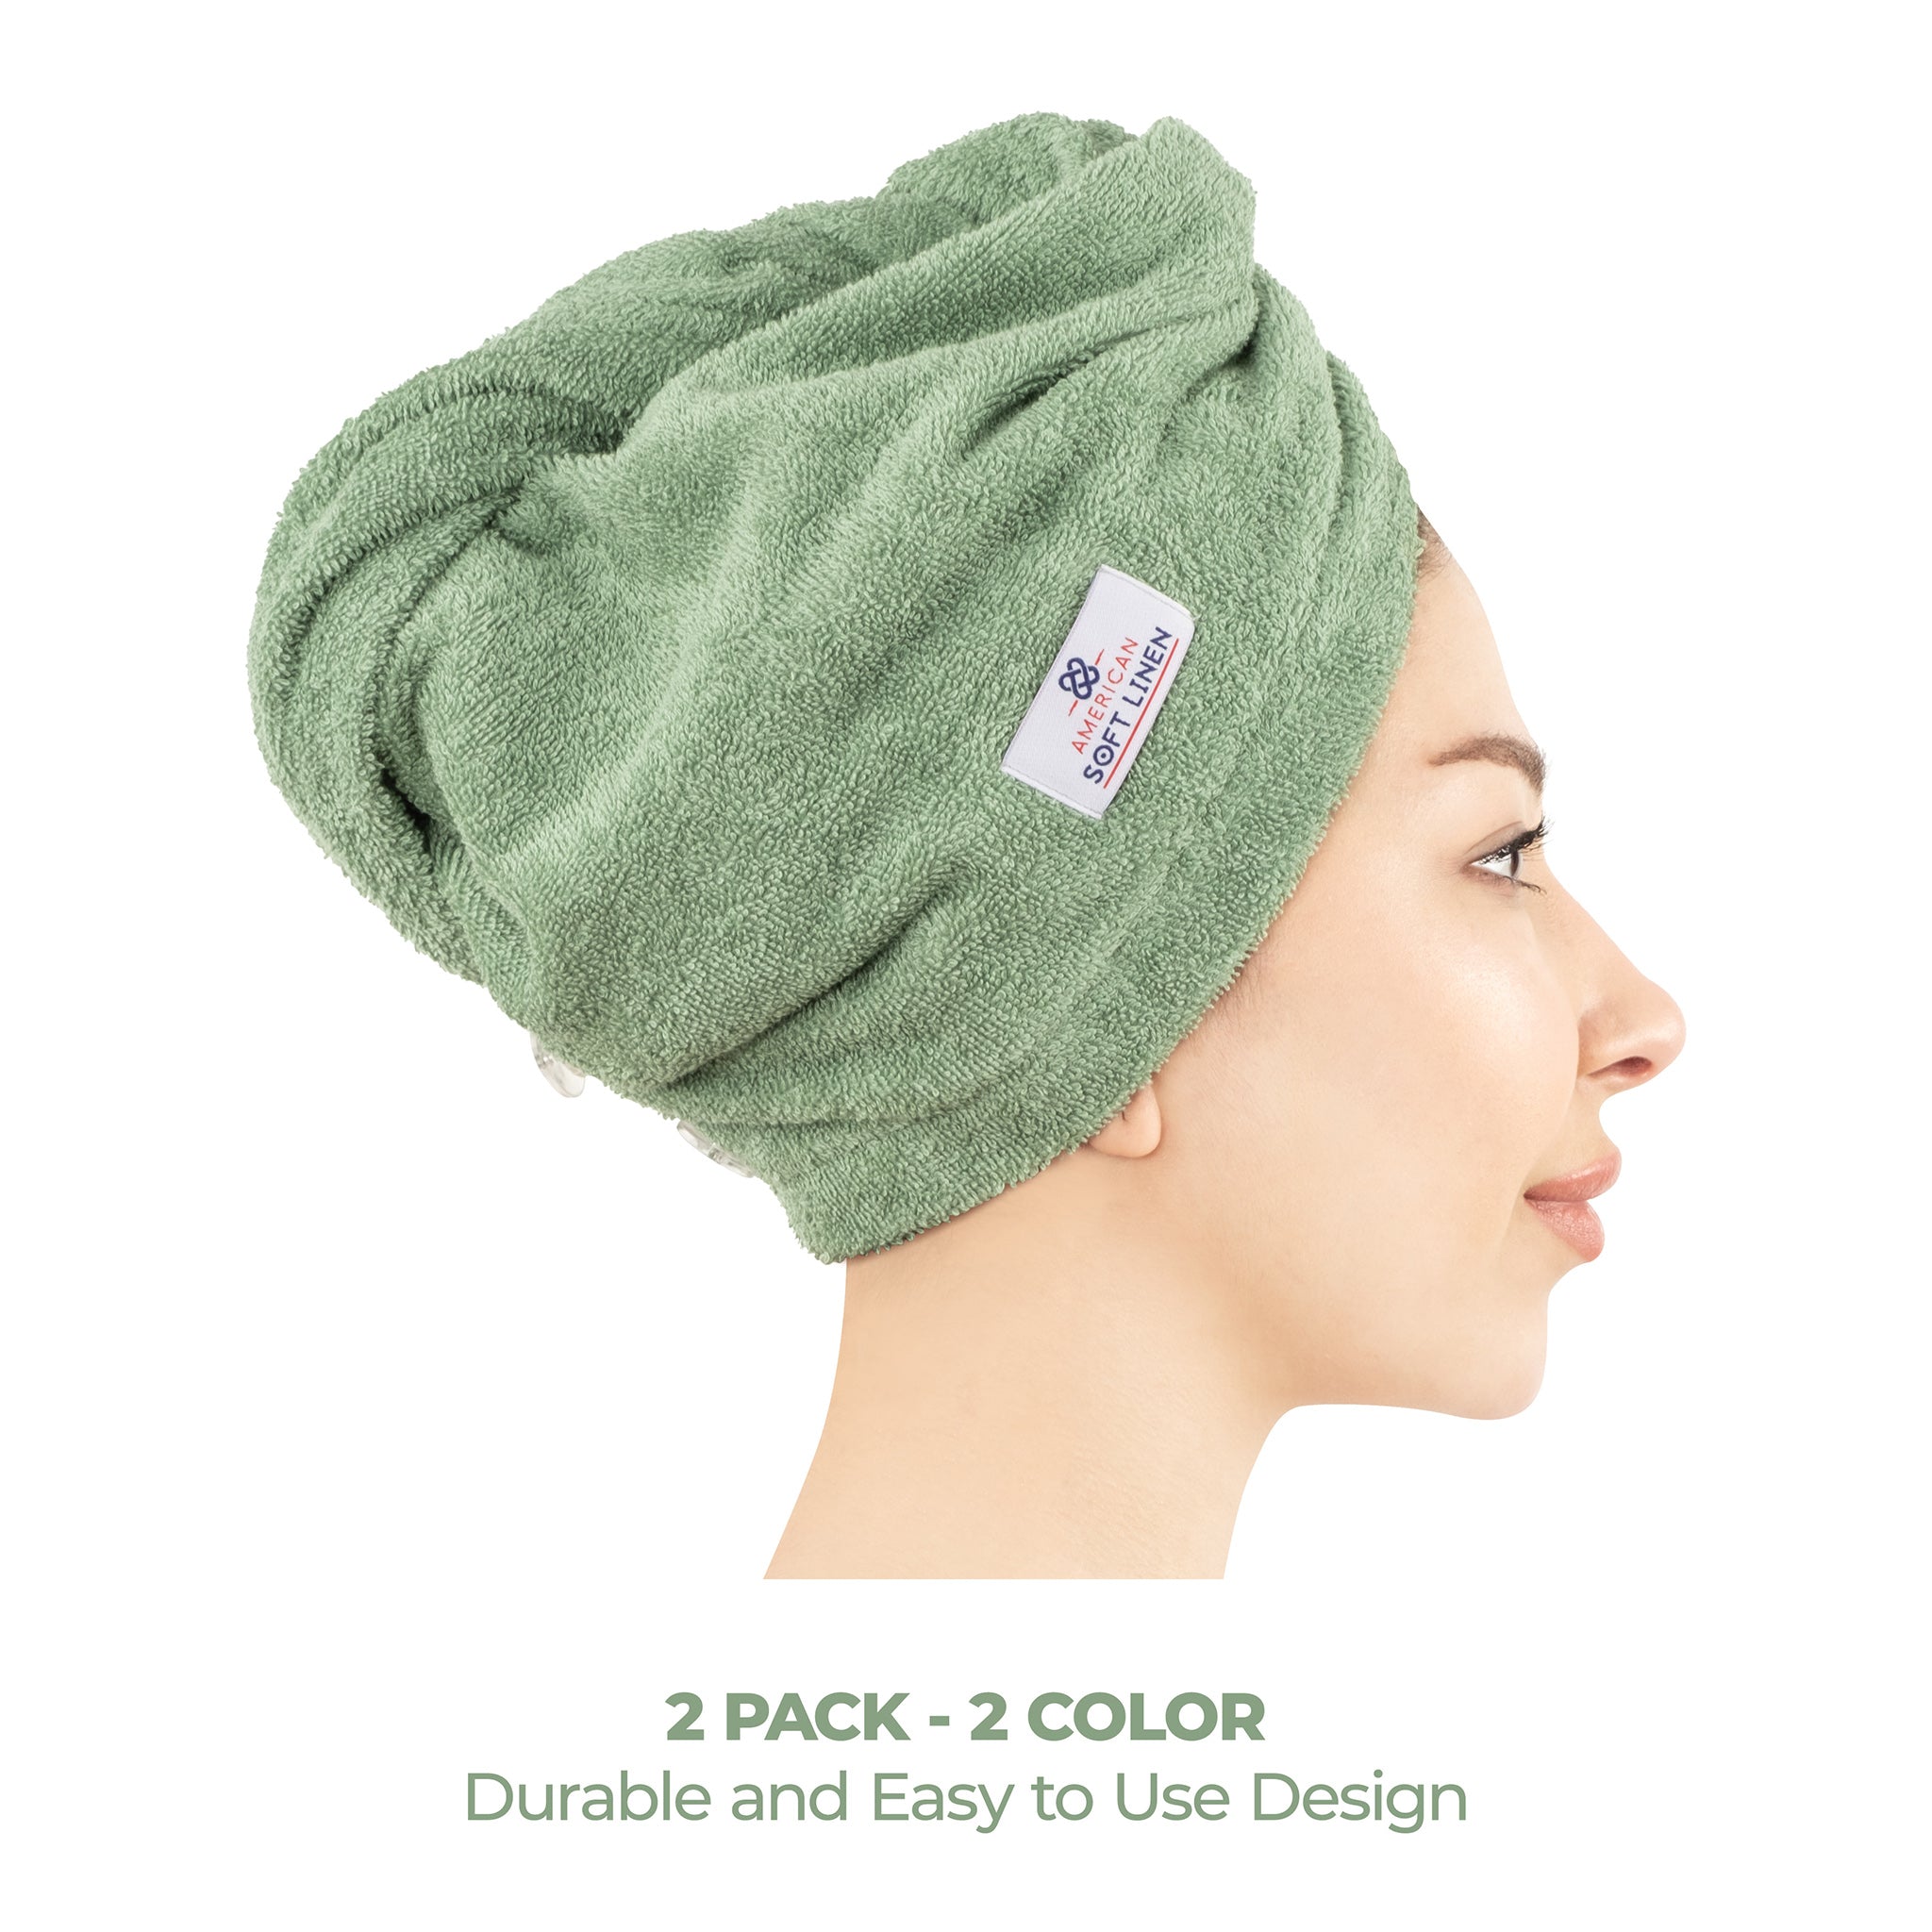 American Soft Linen 100% Cotton Hair Drying Towels for Women 2 pack 75 set case pack rockridge-sage green-4